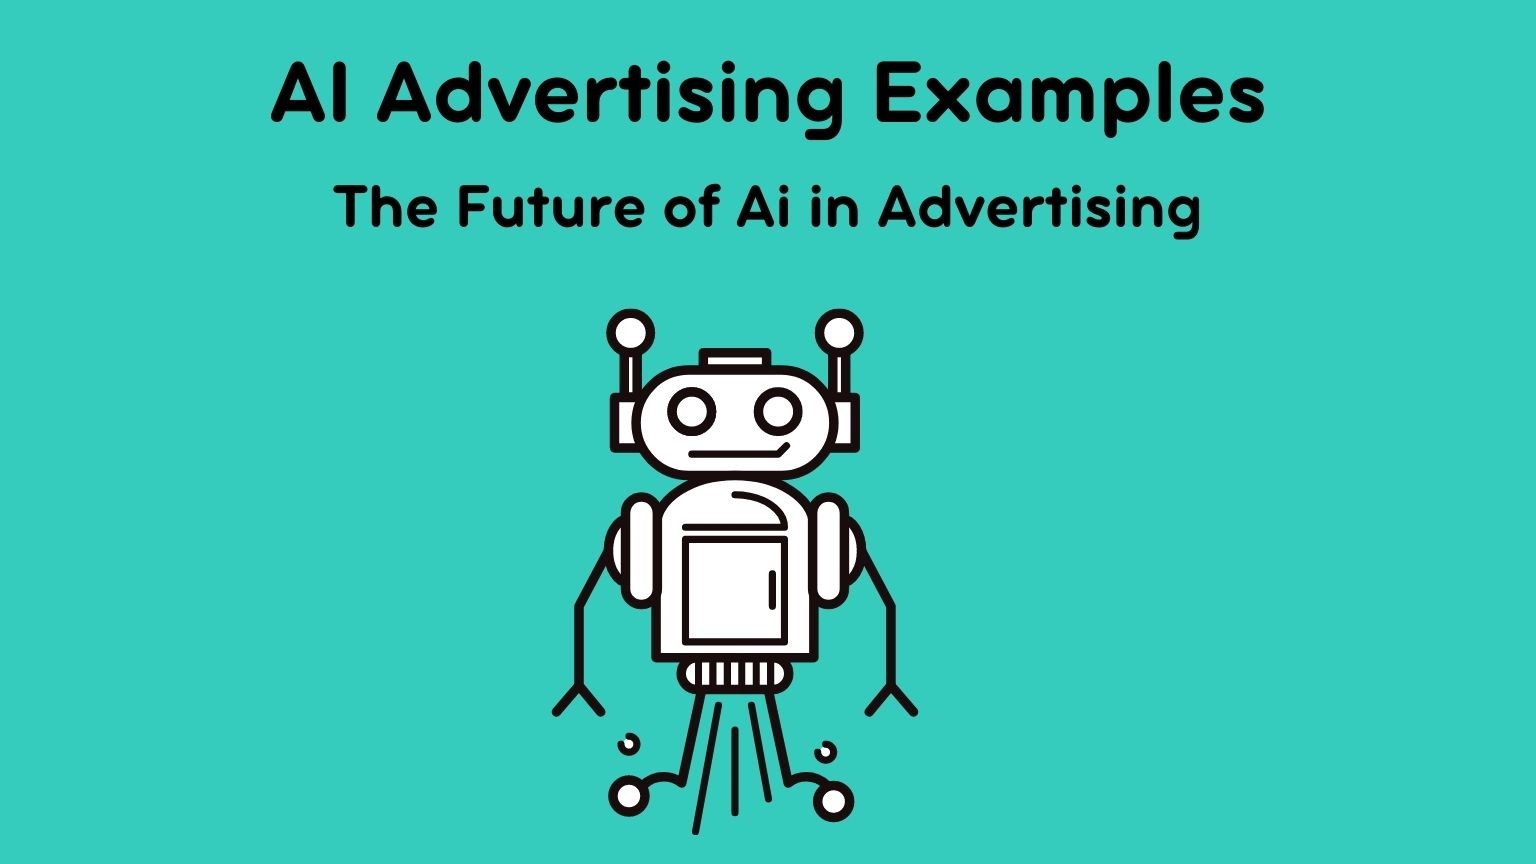 AI Advertising Examples The Future of Ai in Advertising